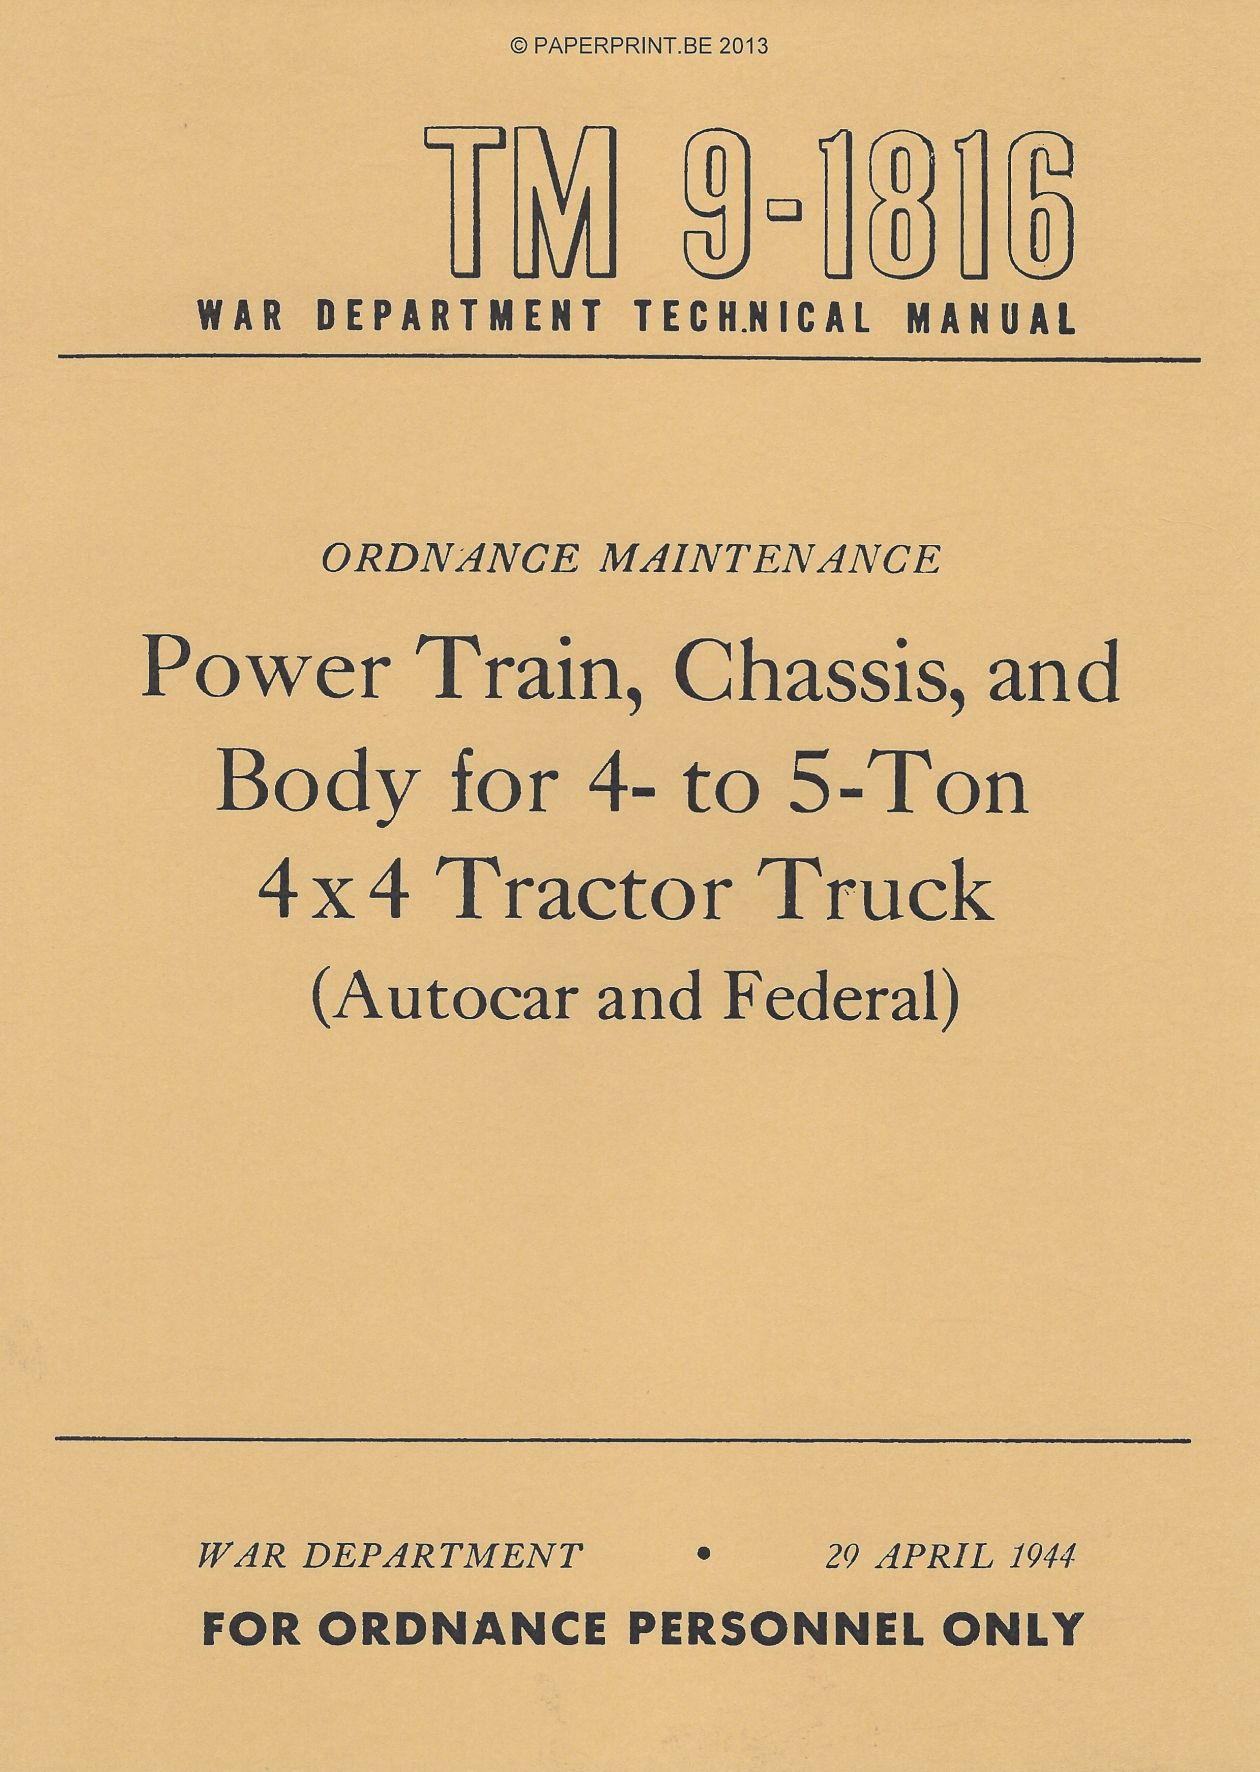 TM 9-1816 US POWER TRAIN, CHASSIS, AND BODY FOR 4-TO 5-TON 4 x 4 TRACTOR TRUCK (AUTOCAR AND FEDERAL)